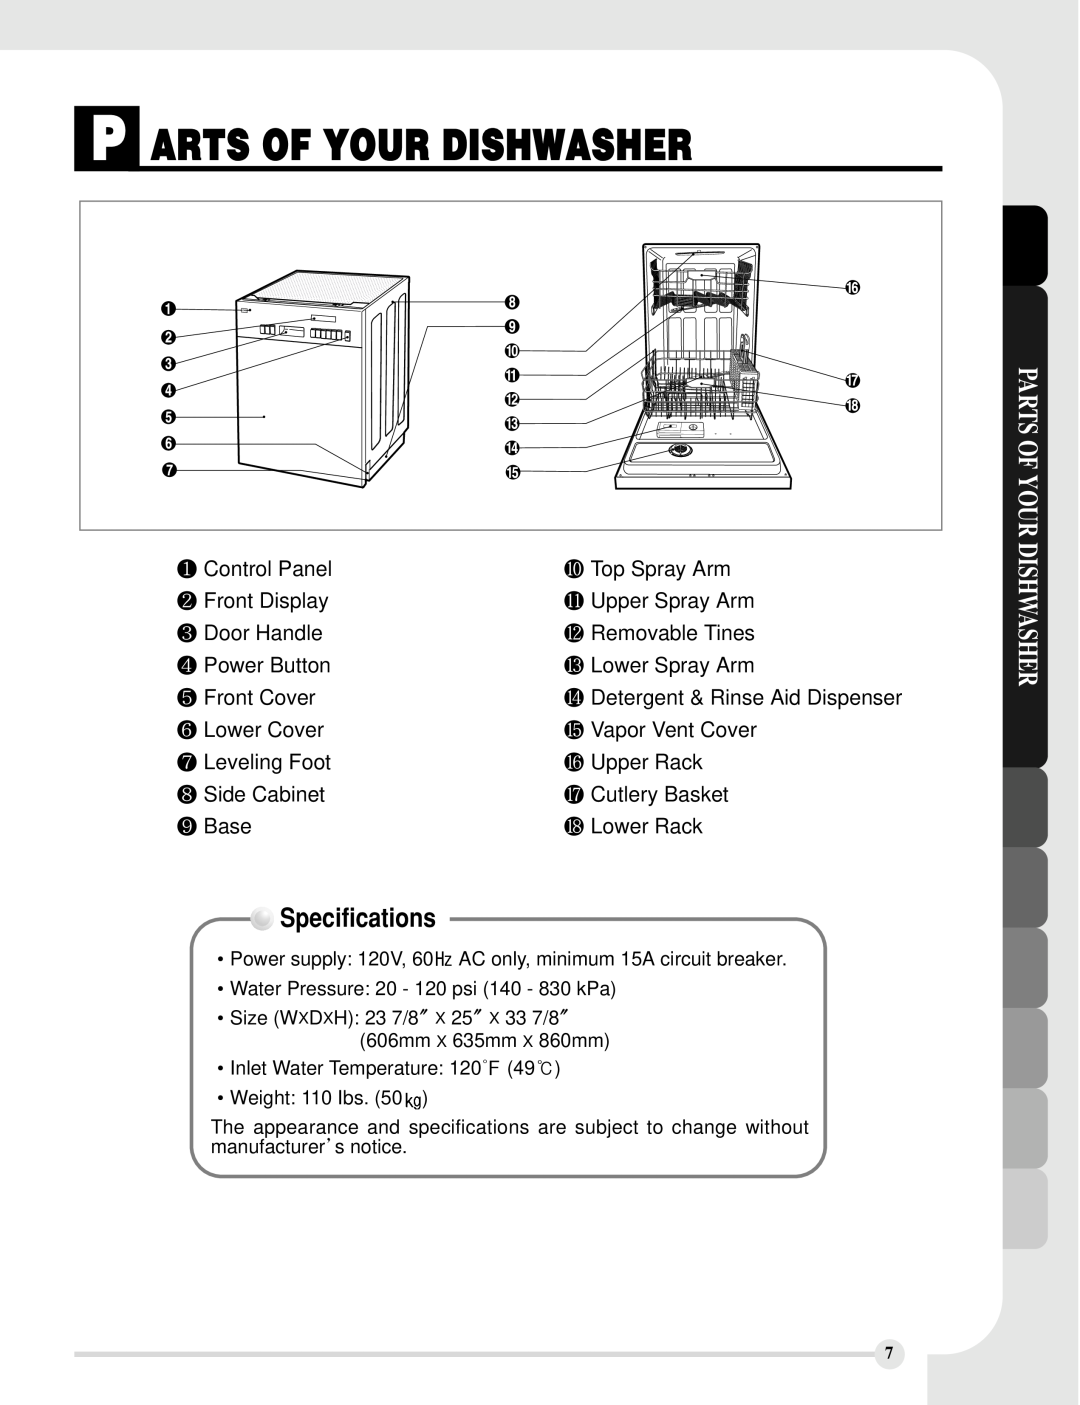 LG Electronics LDS5811ST, LDS5811WW, LDS5811BB manual P Arts Of Your Dishwasher, Specifications, Parts Of Your Dishwasher 